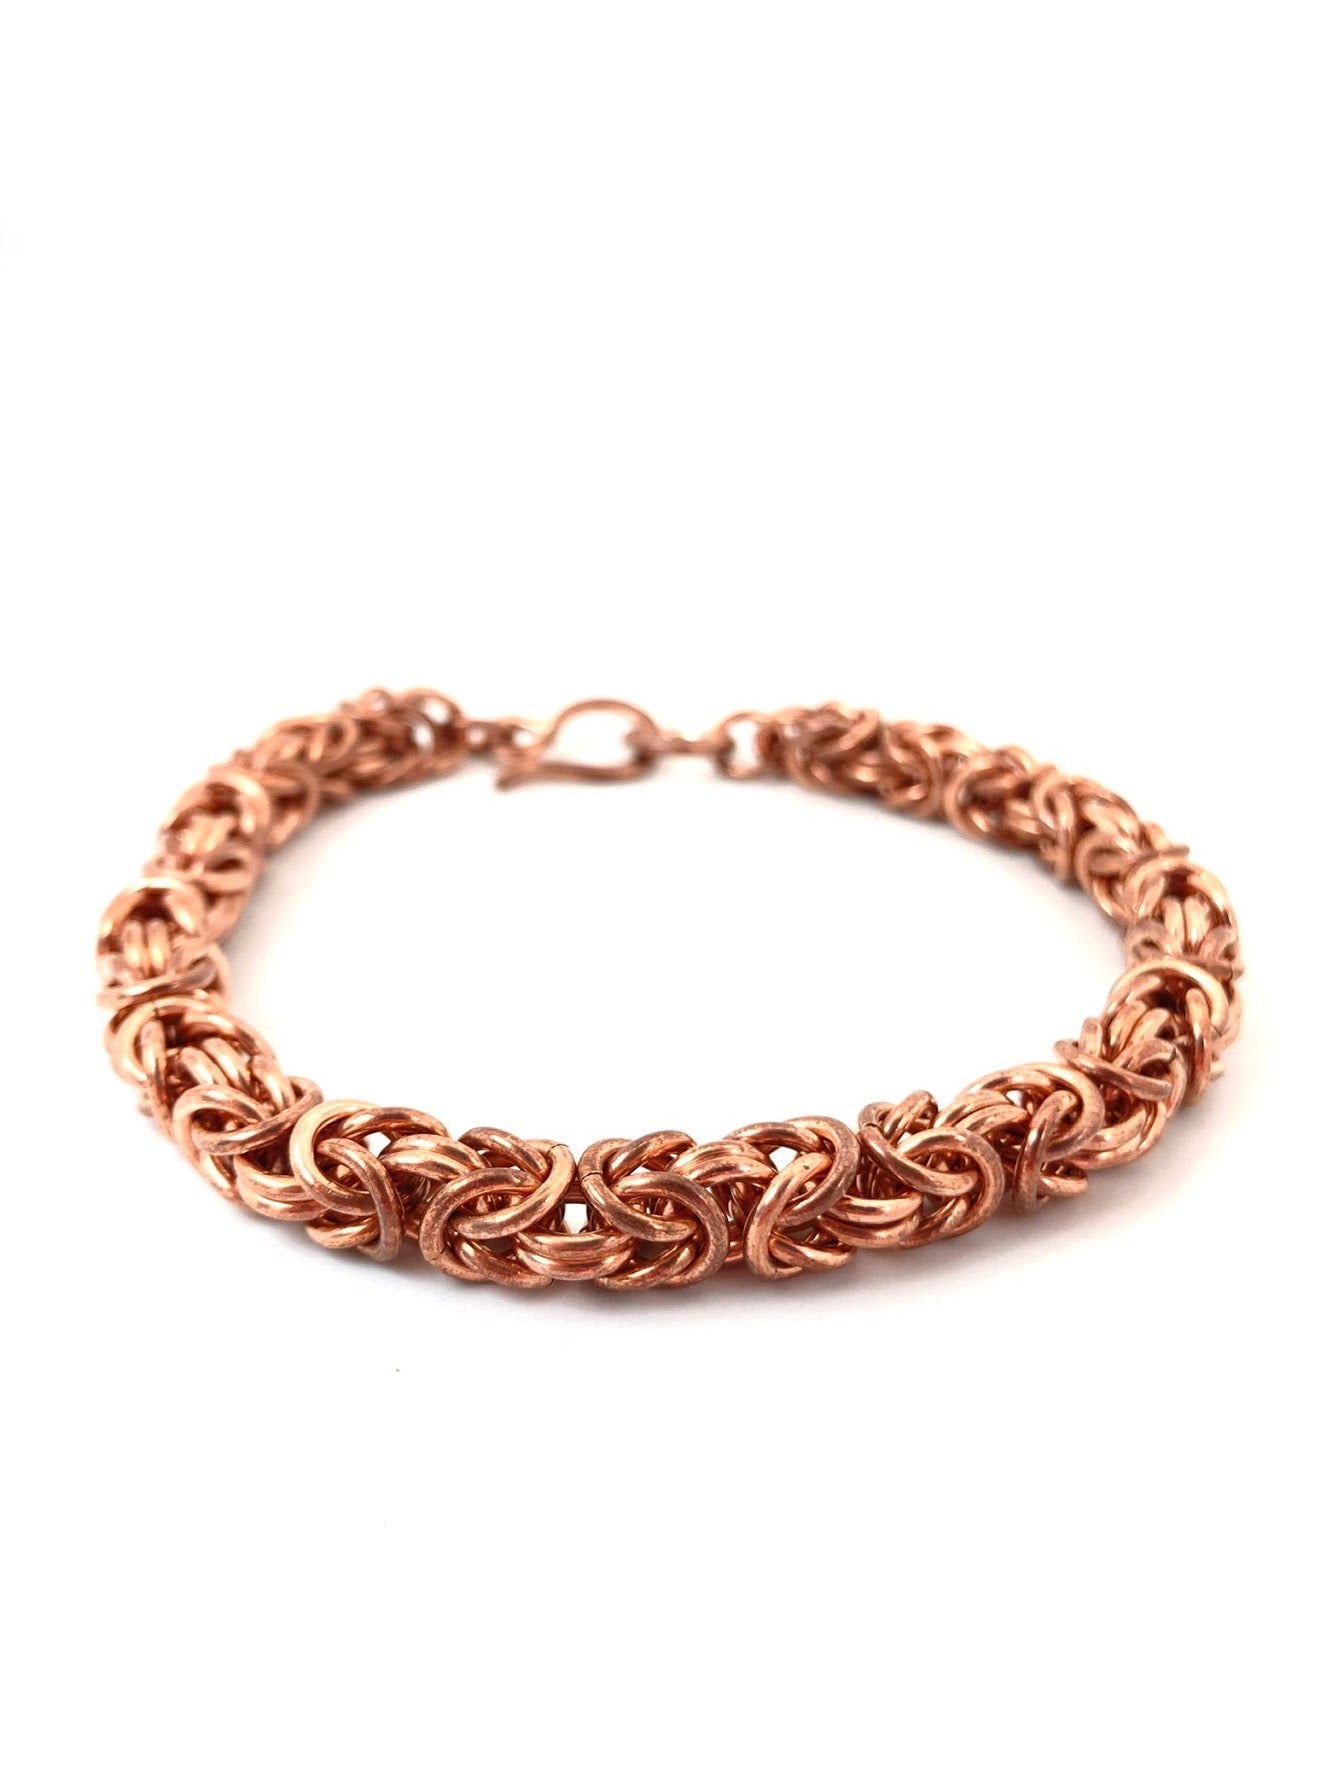 Chunky Byzantine Chainmaille Bracelet in Copper